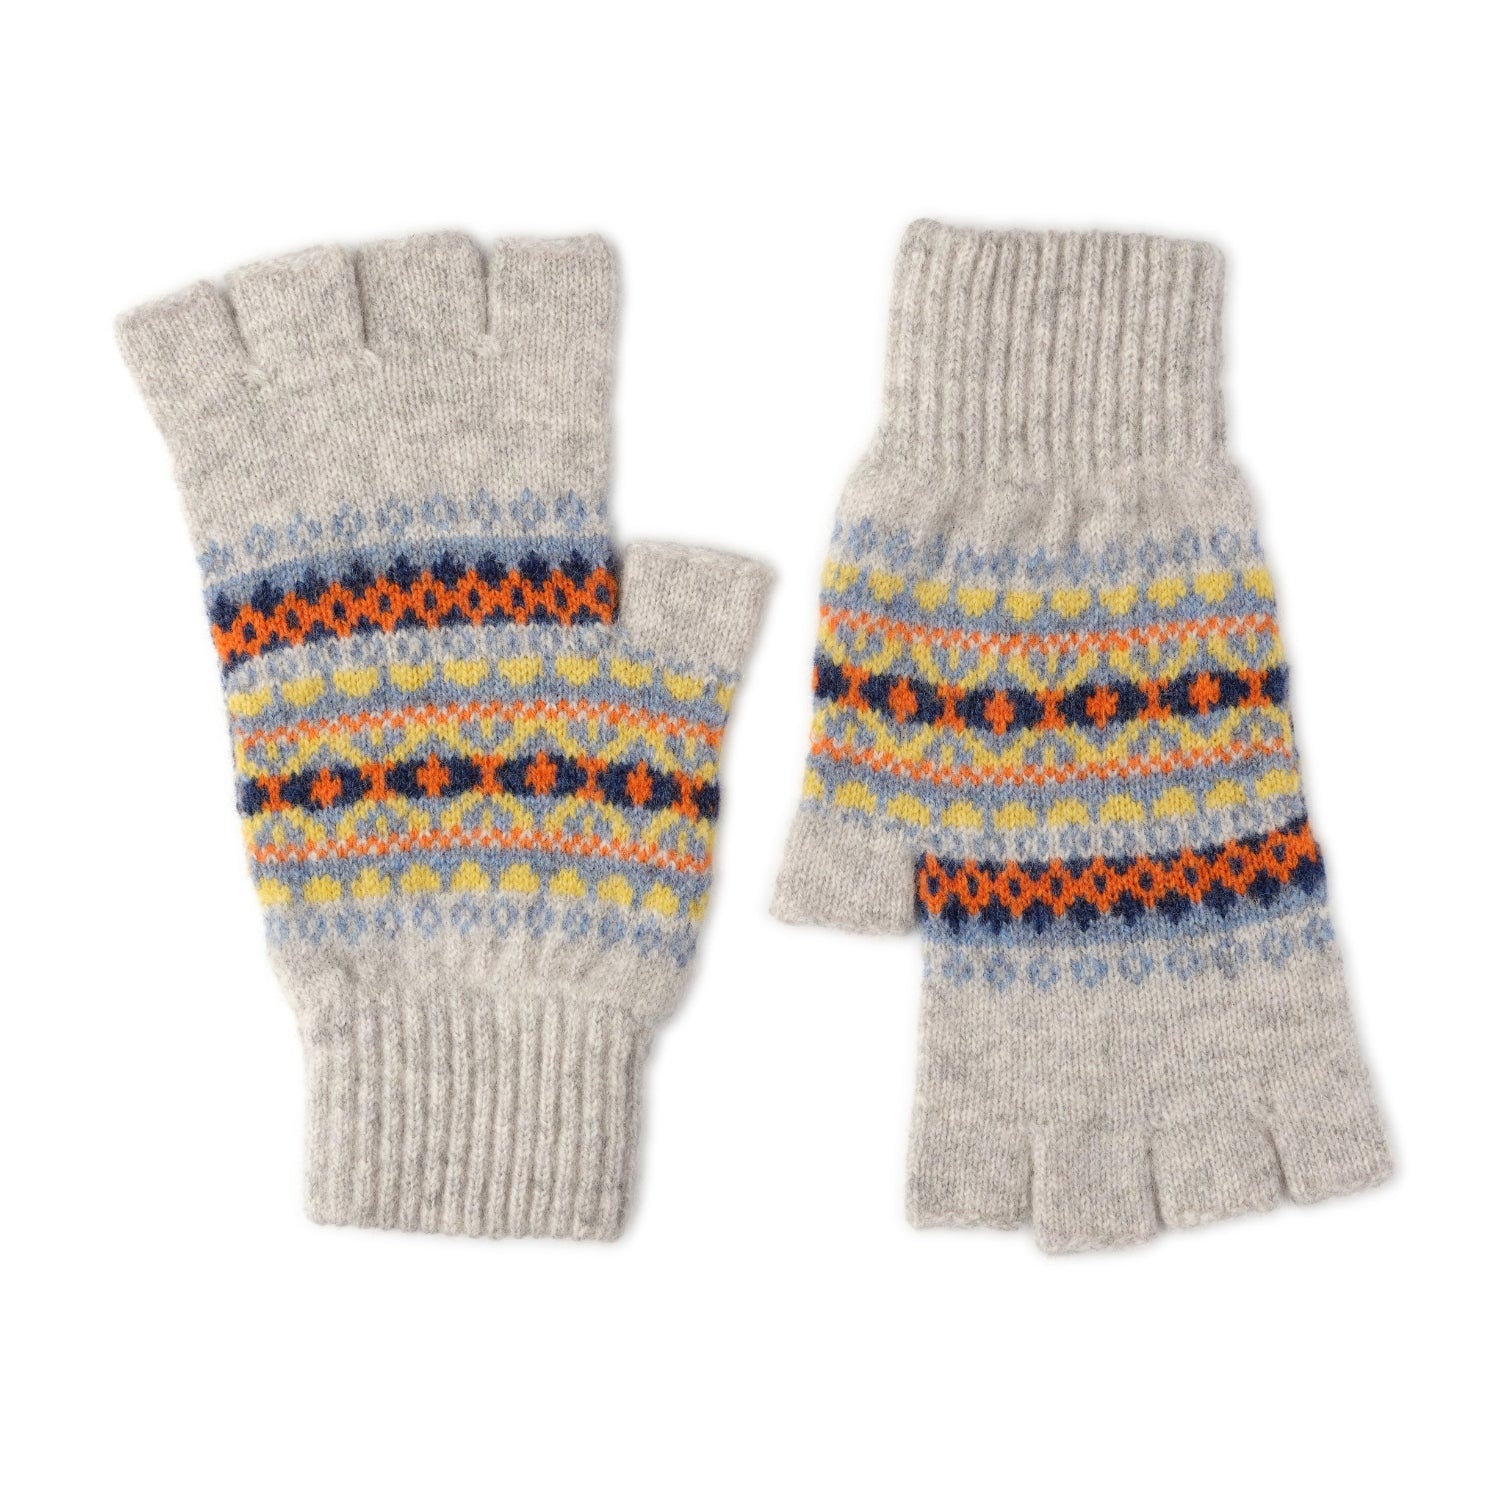 Patterned Fingerless Gloves for Ladies | Grey | The Cashmere Choice